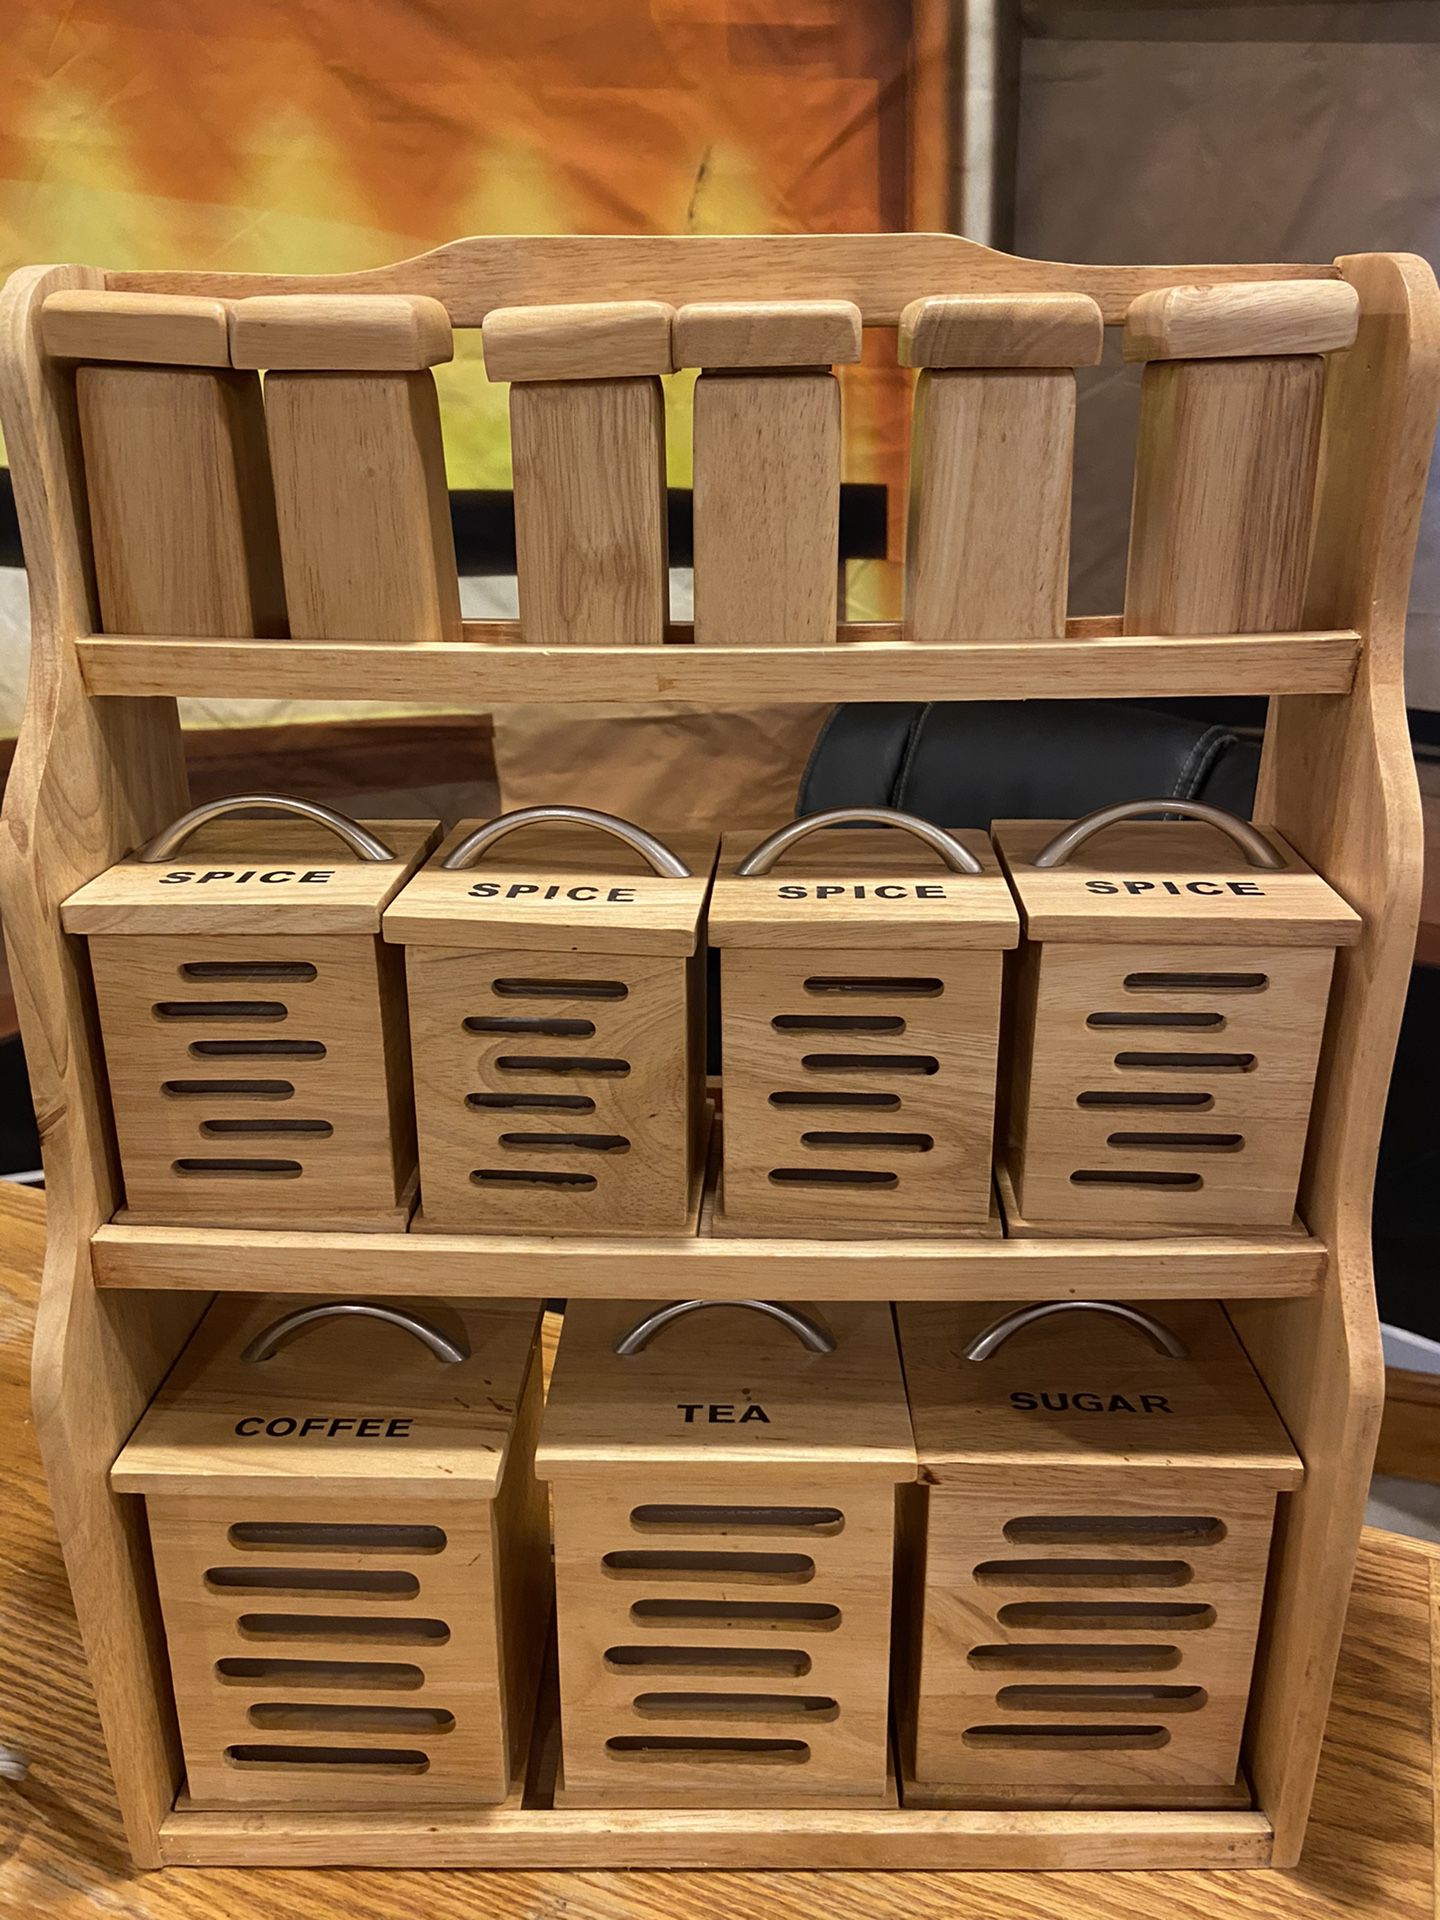 Spice rack and storage containers. Made from real wood